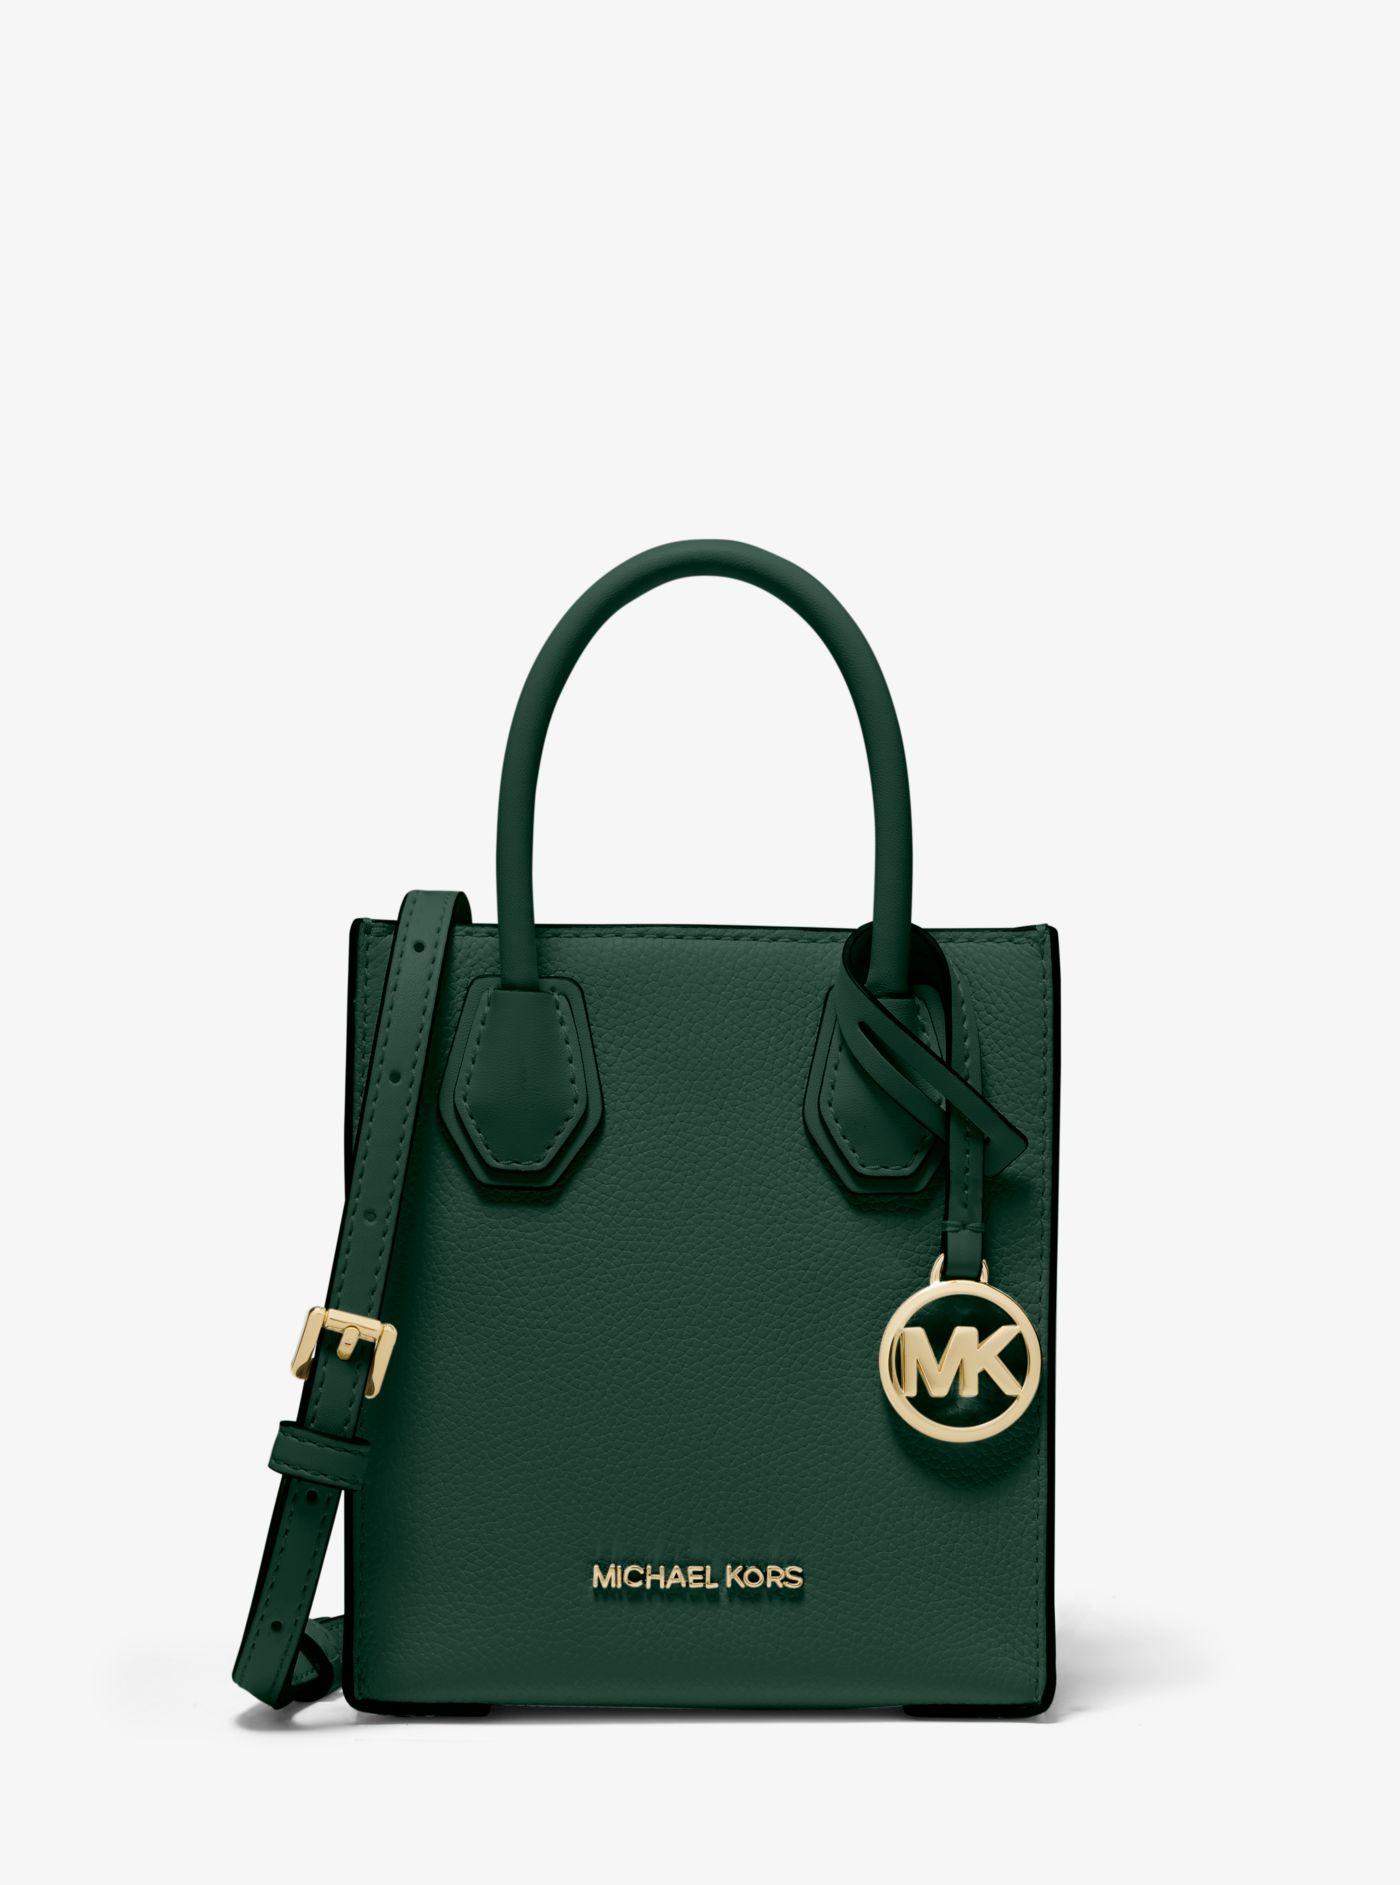 Michael Kors Mercer Extra-small Pebbled Leather Crossbody Bag in Green |  Lyst